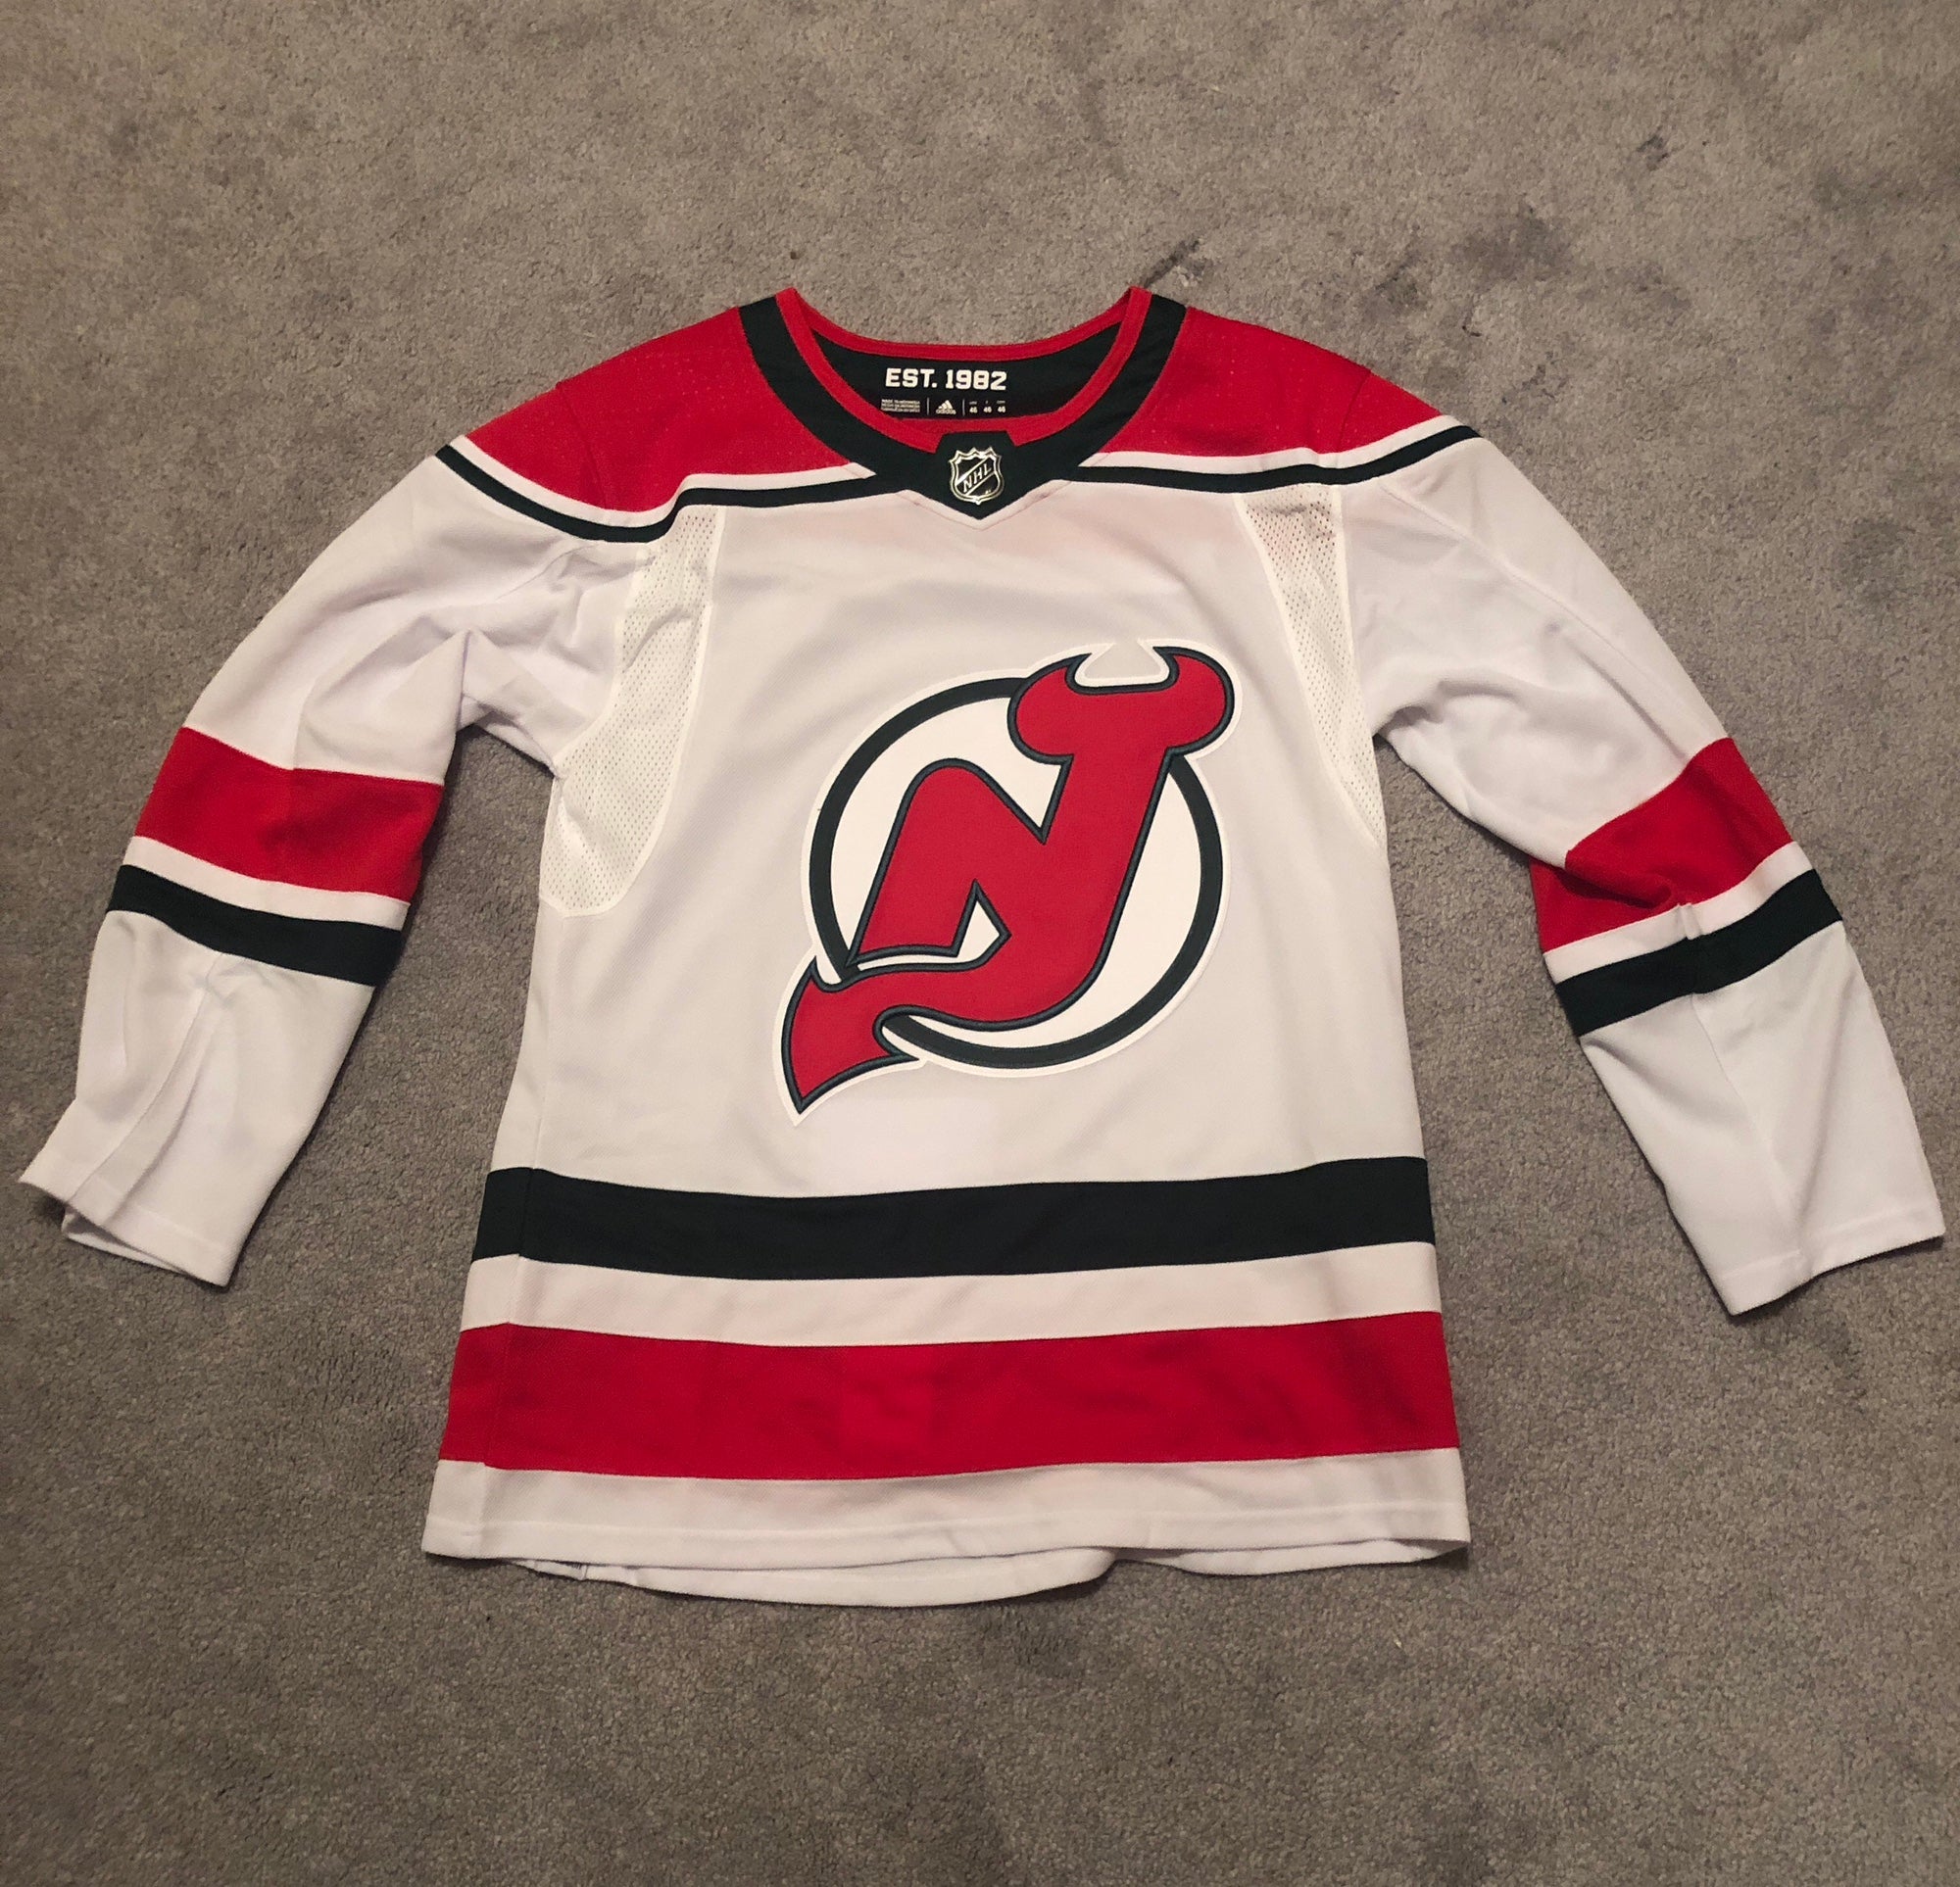 New Jersey Devils discount jersey